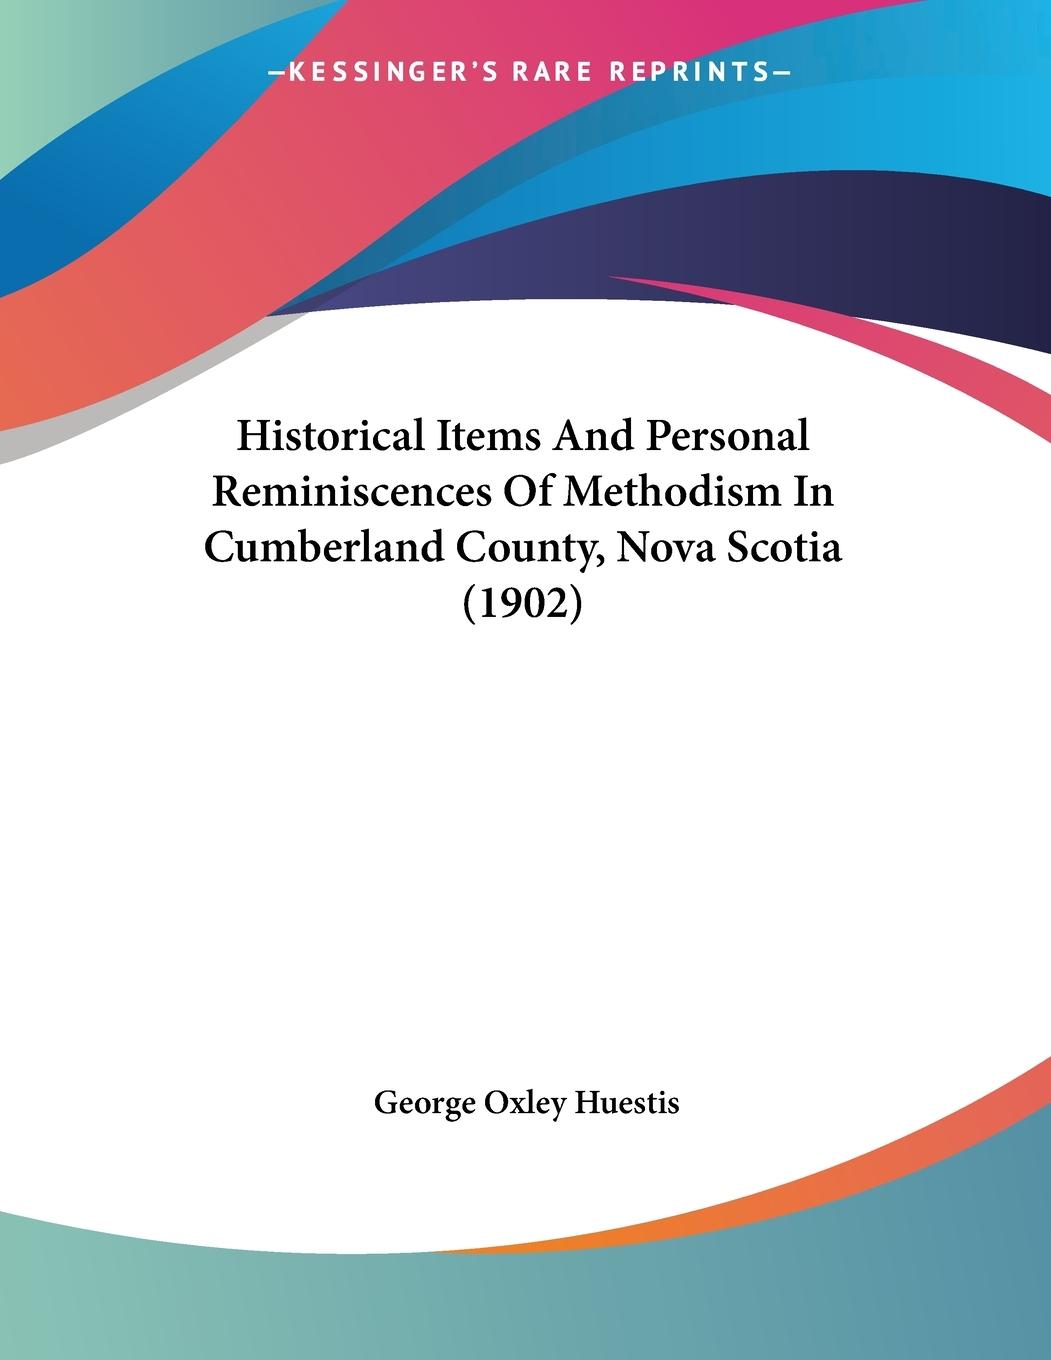 Historical Items And Personal Reminiscences Of Methodism In Cumberland County, Nova Scotia (1902) - Huestis, George Oxley